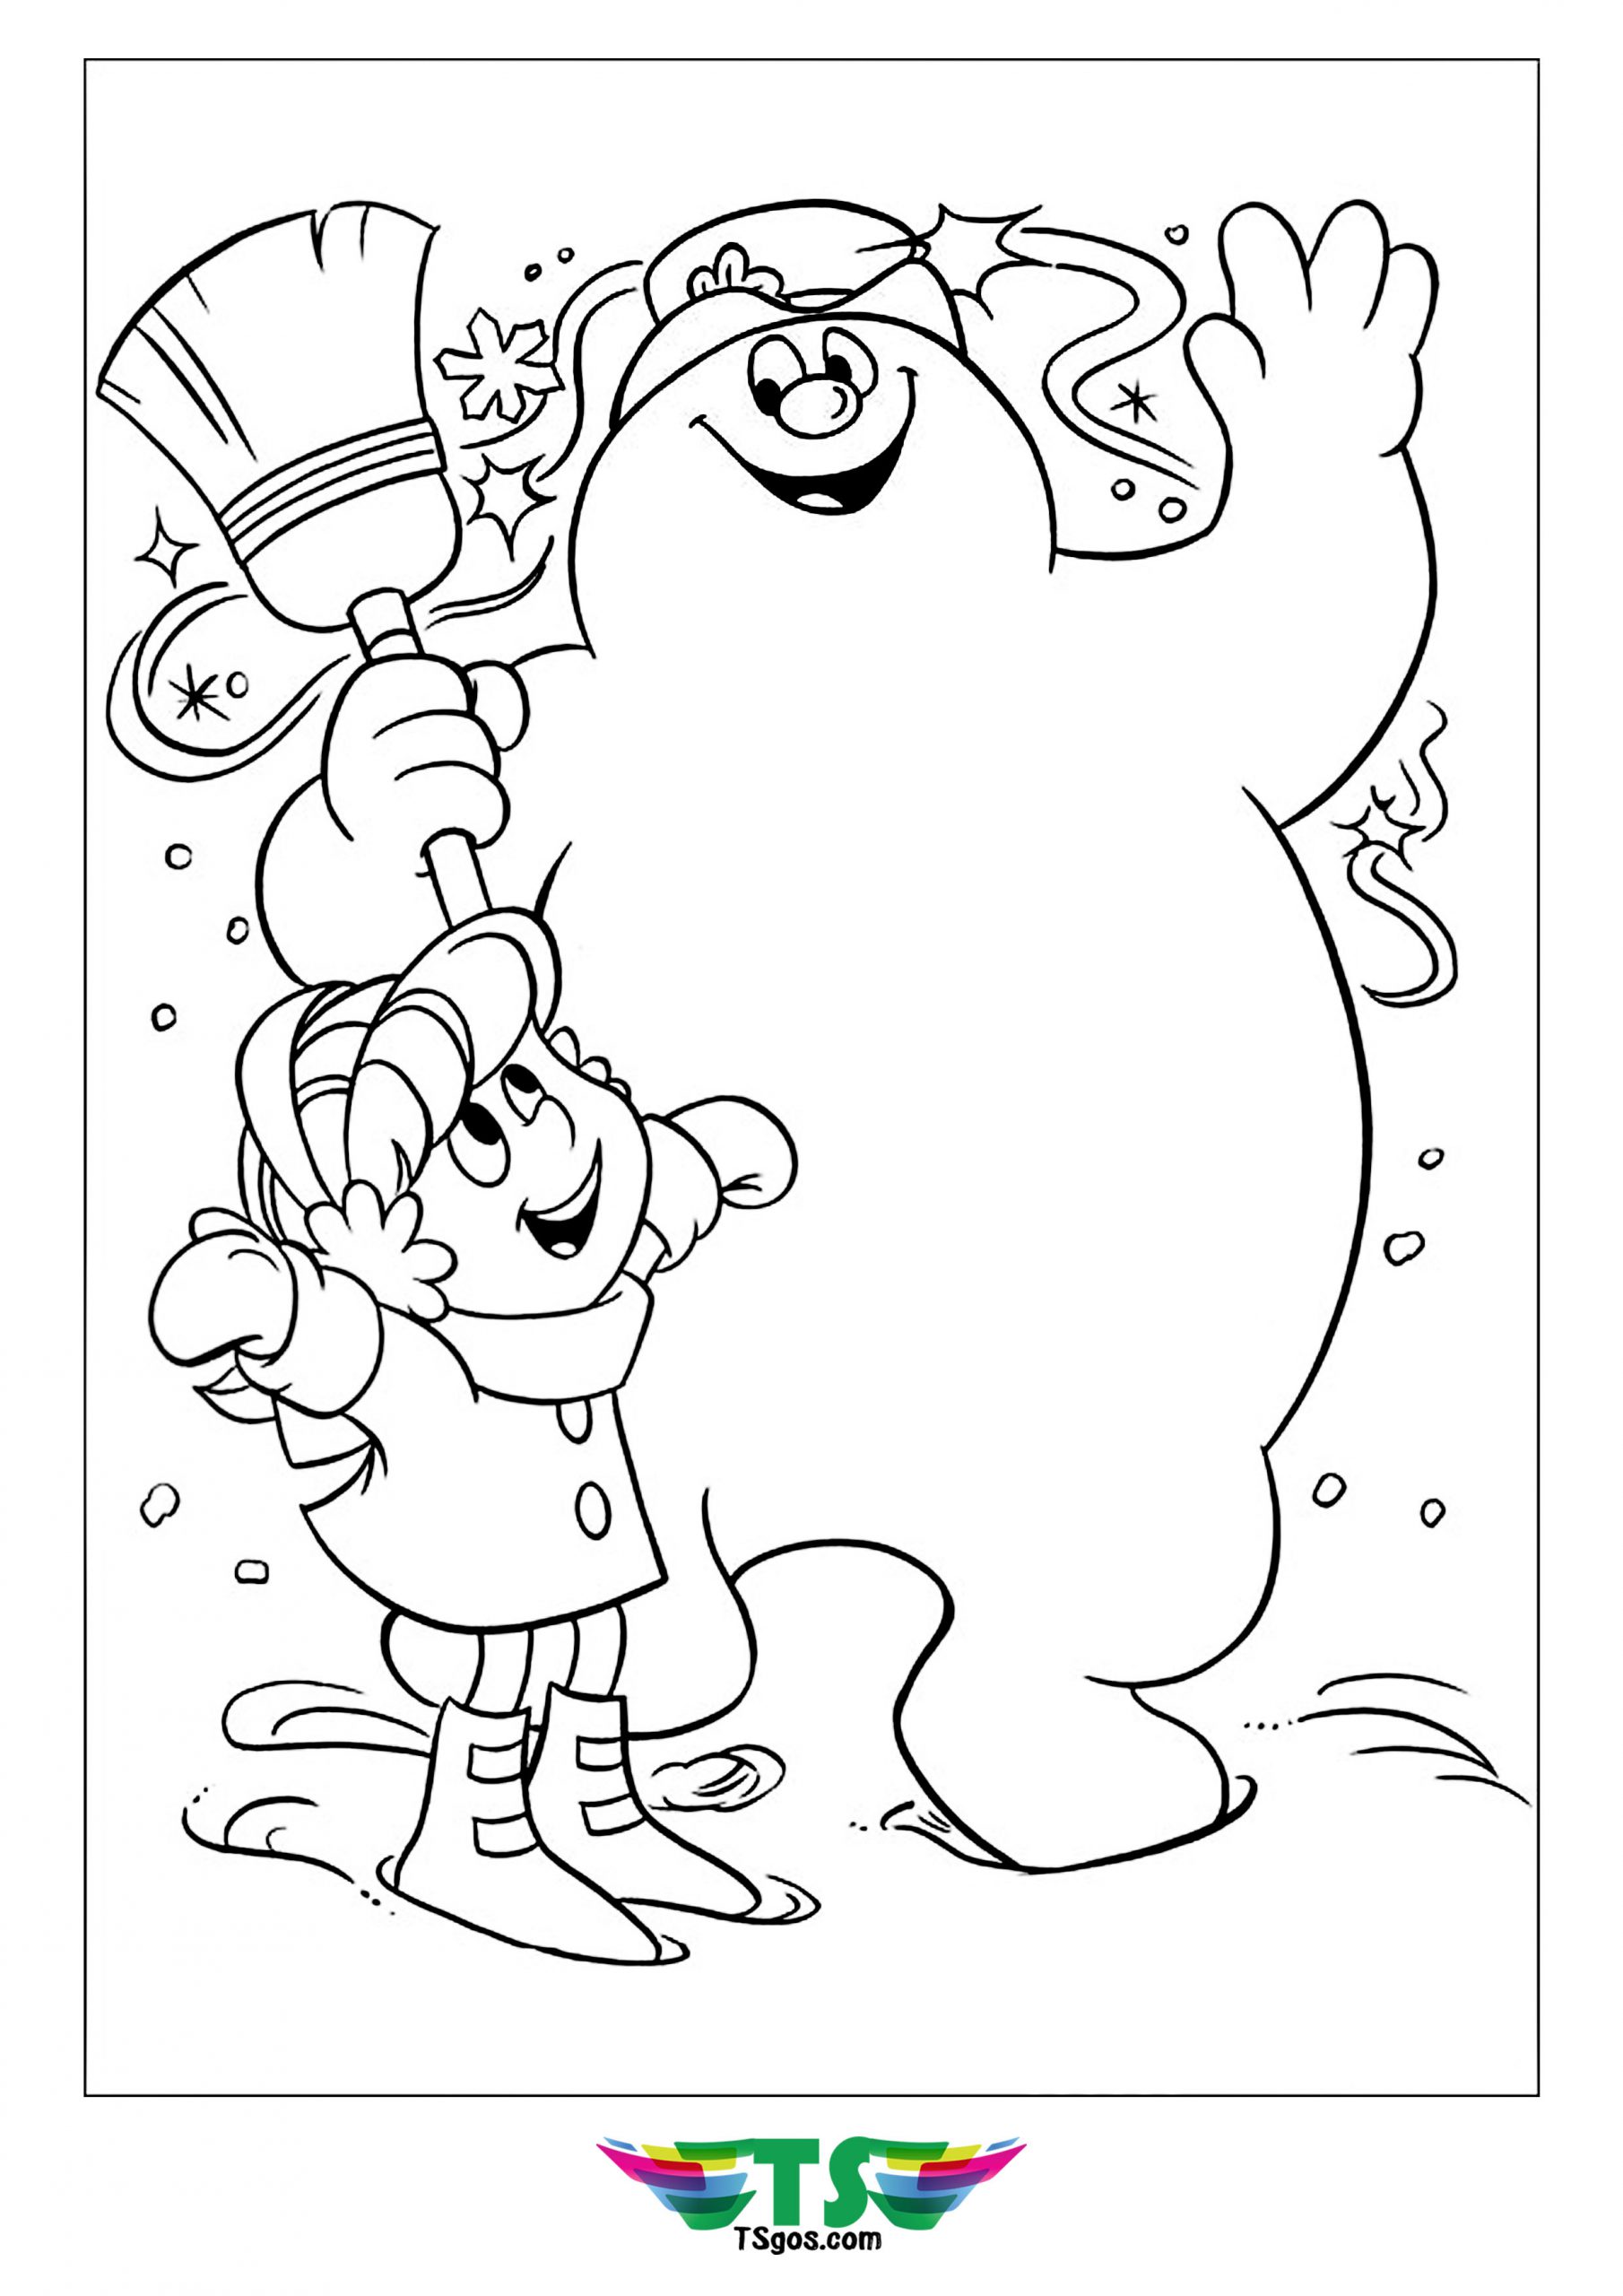 Play Color With Frosty The Snowman Coloring Page